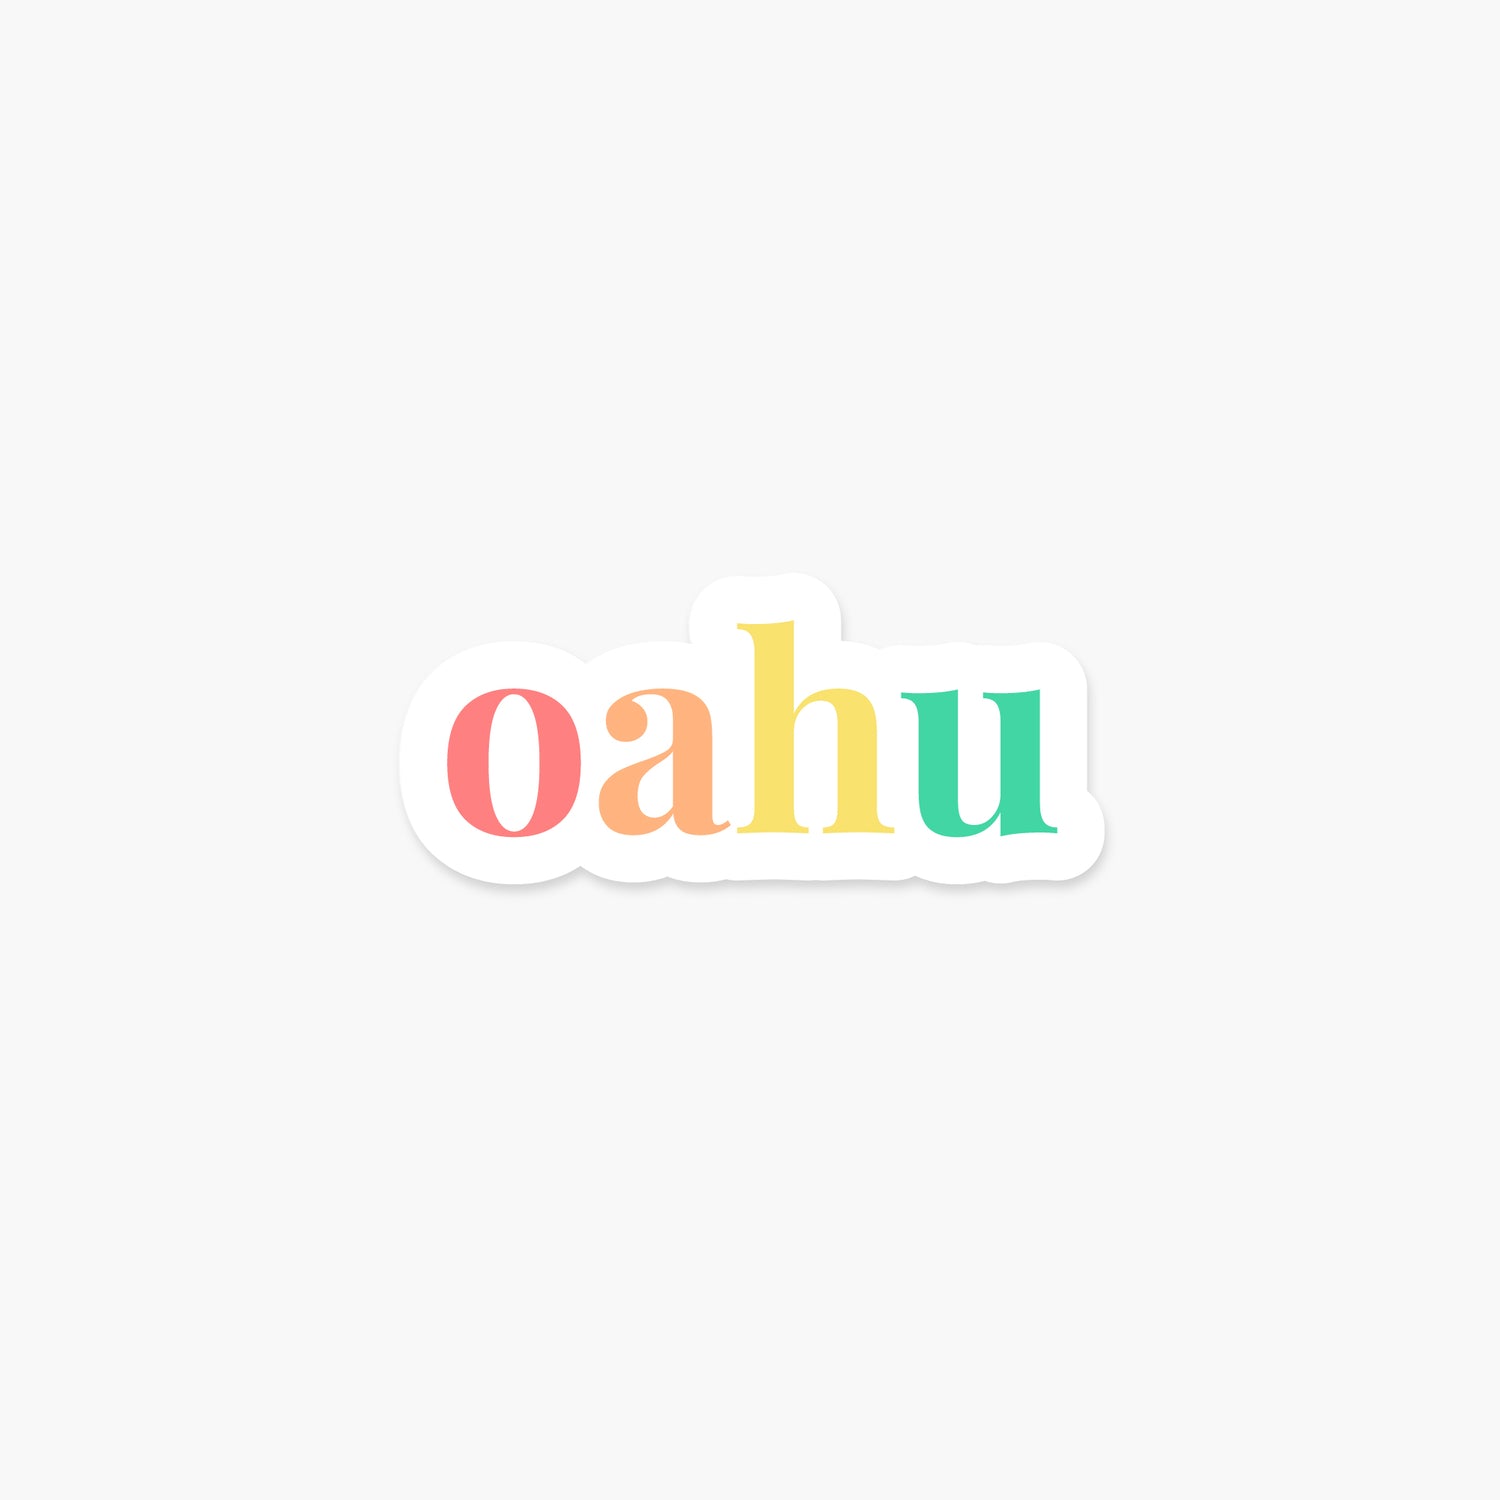 Oahu, Hawaii - Everyday Sticker | Footnotes Paper